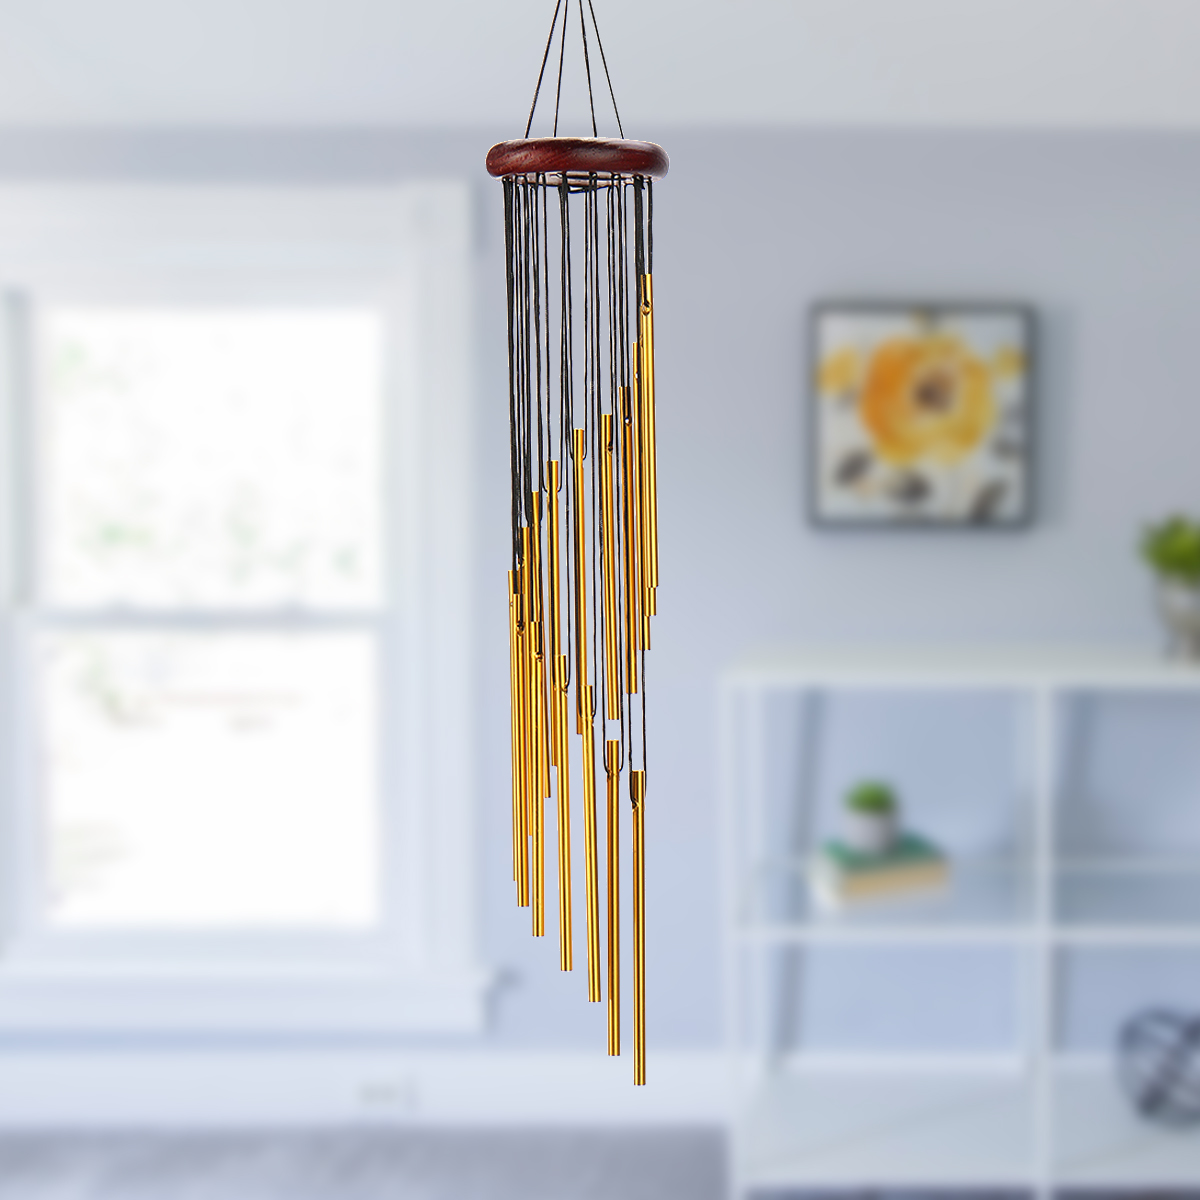 Metal-Tube-Wind-Chime-Indoor-And-Outdoor-Decorations-1737137-7